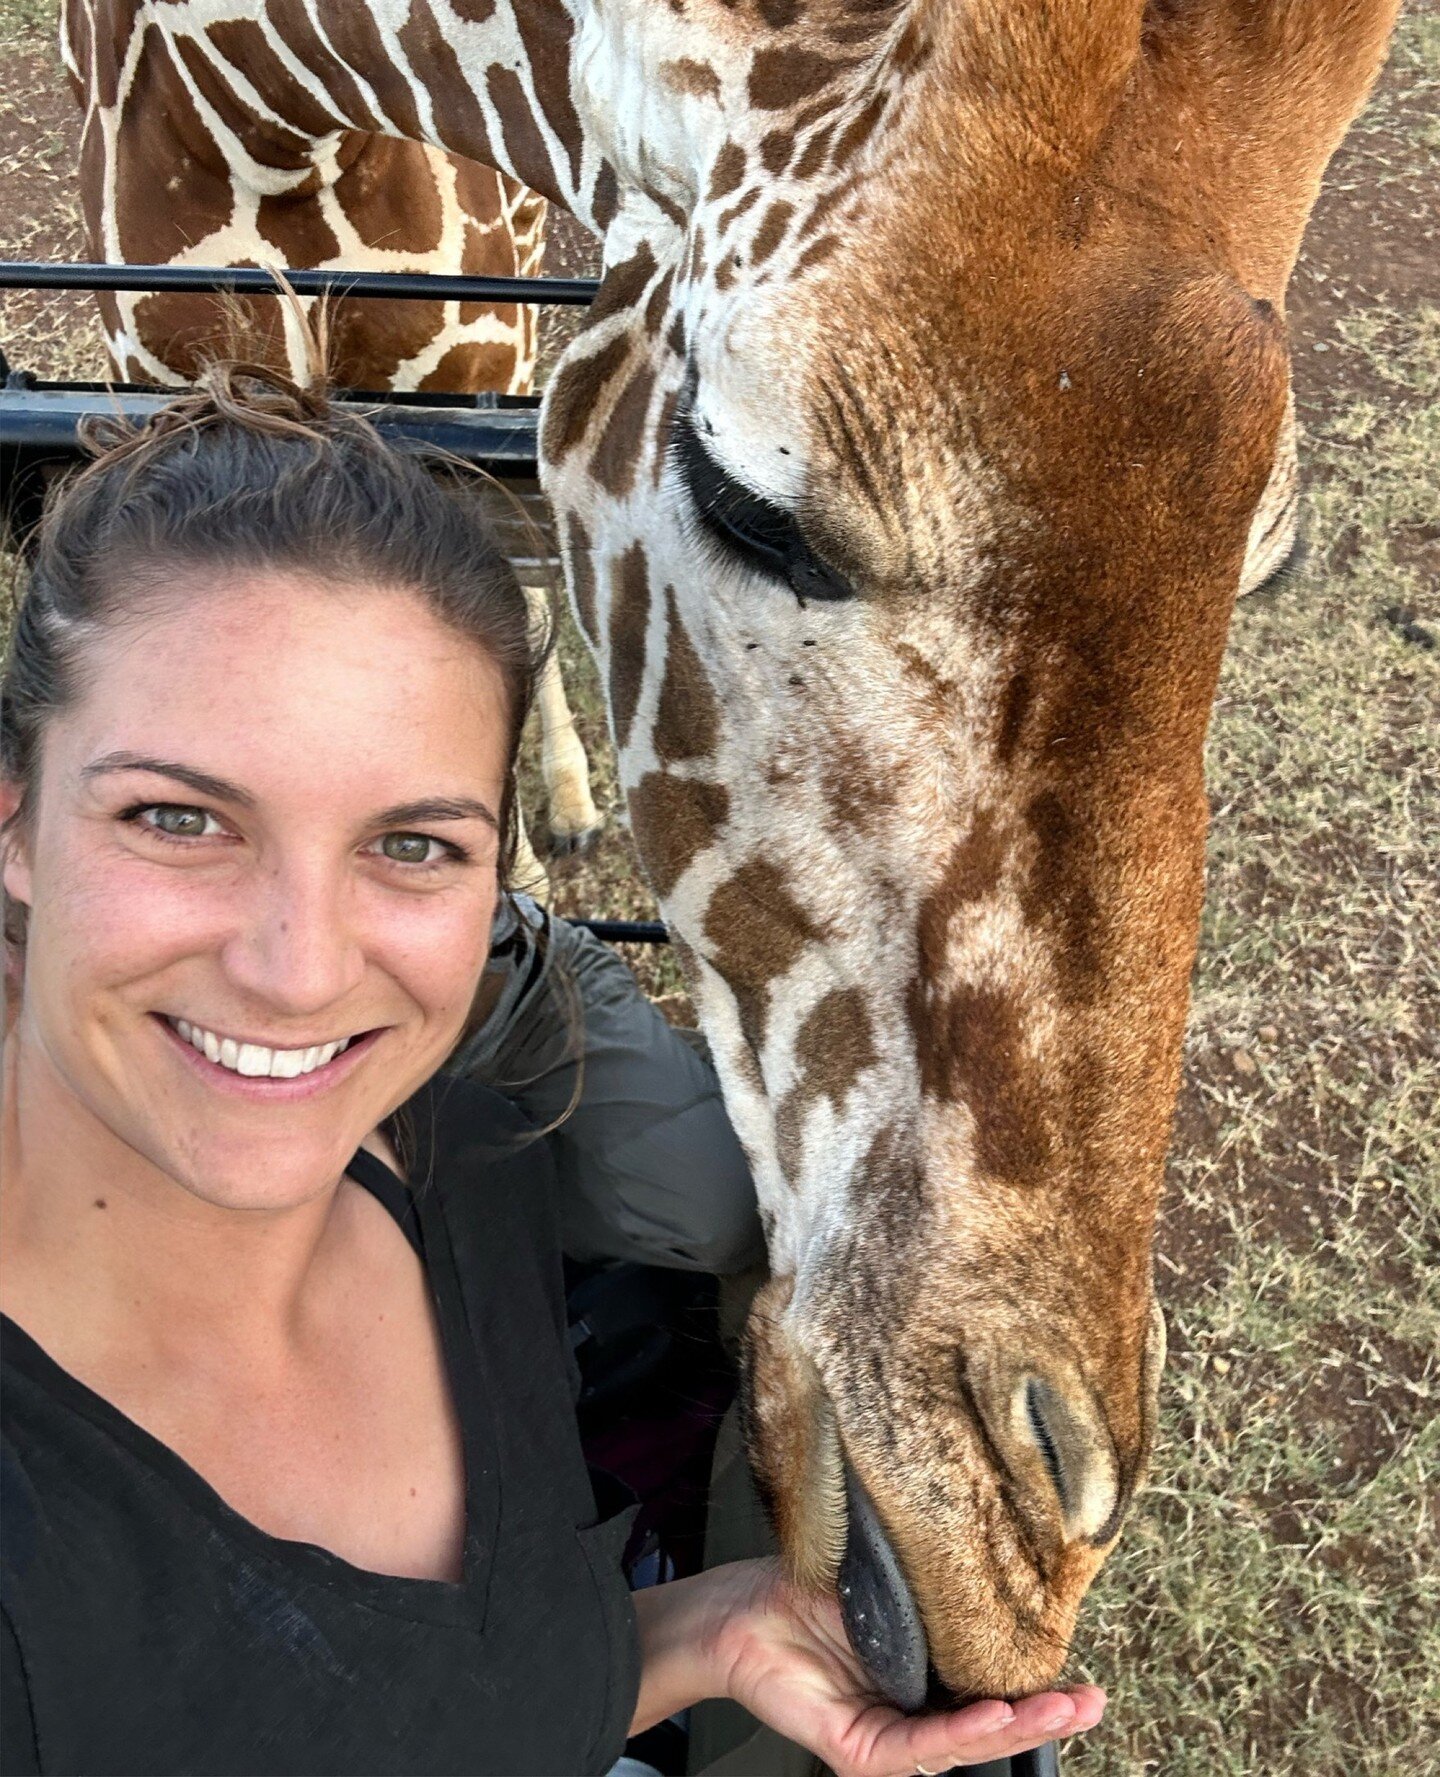 Tala the giraffe at Mugie Sanctuary 🦒😍⁠
⁠
Tala was rescued by herders when she was just a few days old. After being raised by humans, she was released, however, being a little too familiar with people, she was causing some havoc at local markets. ⁠